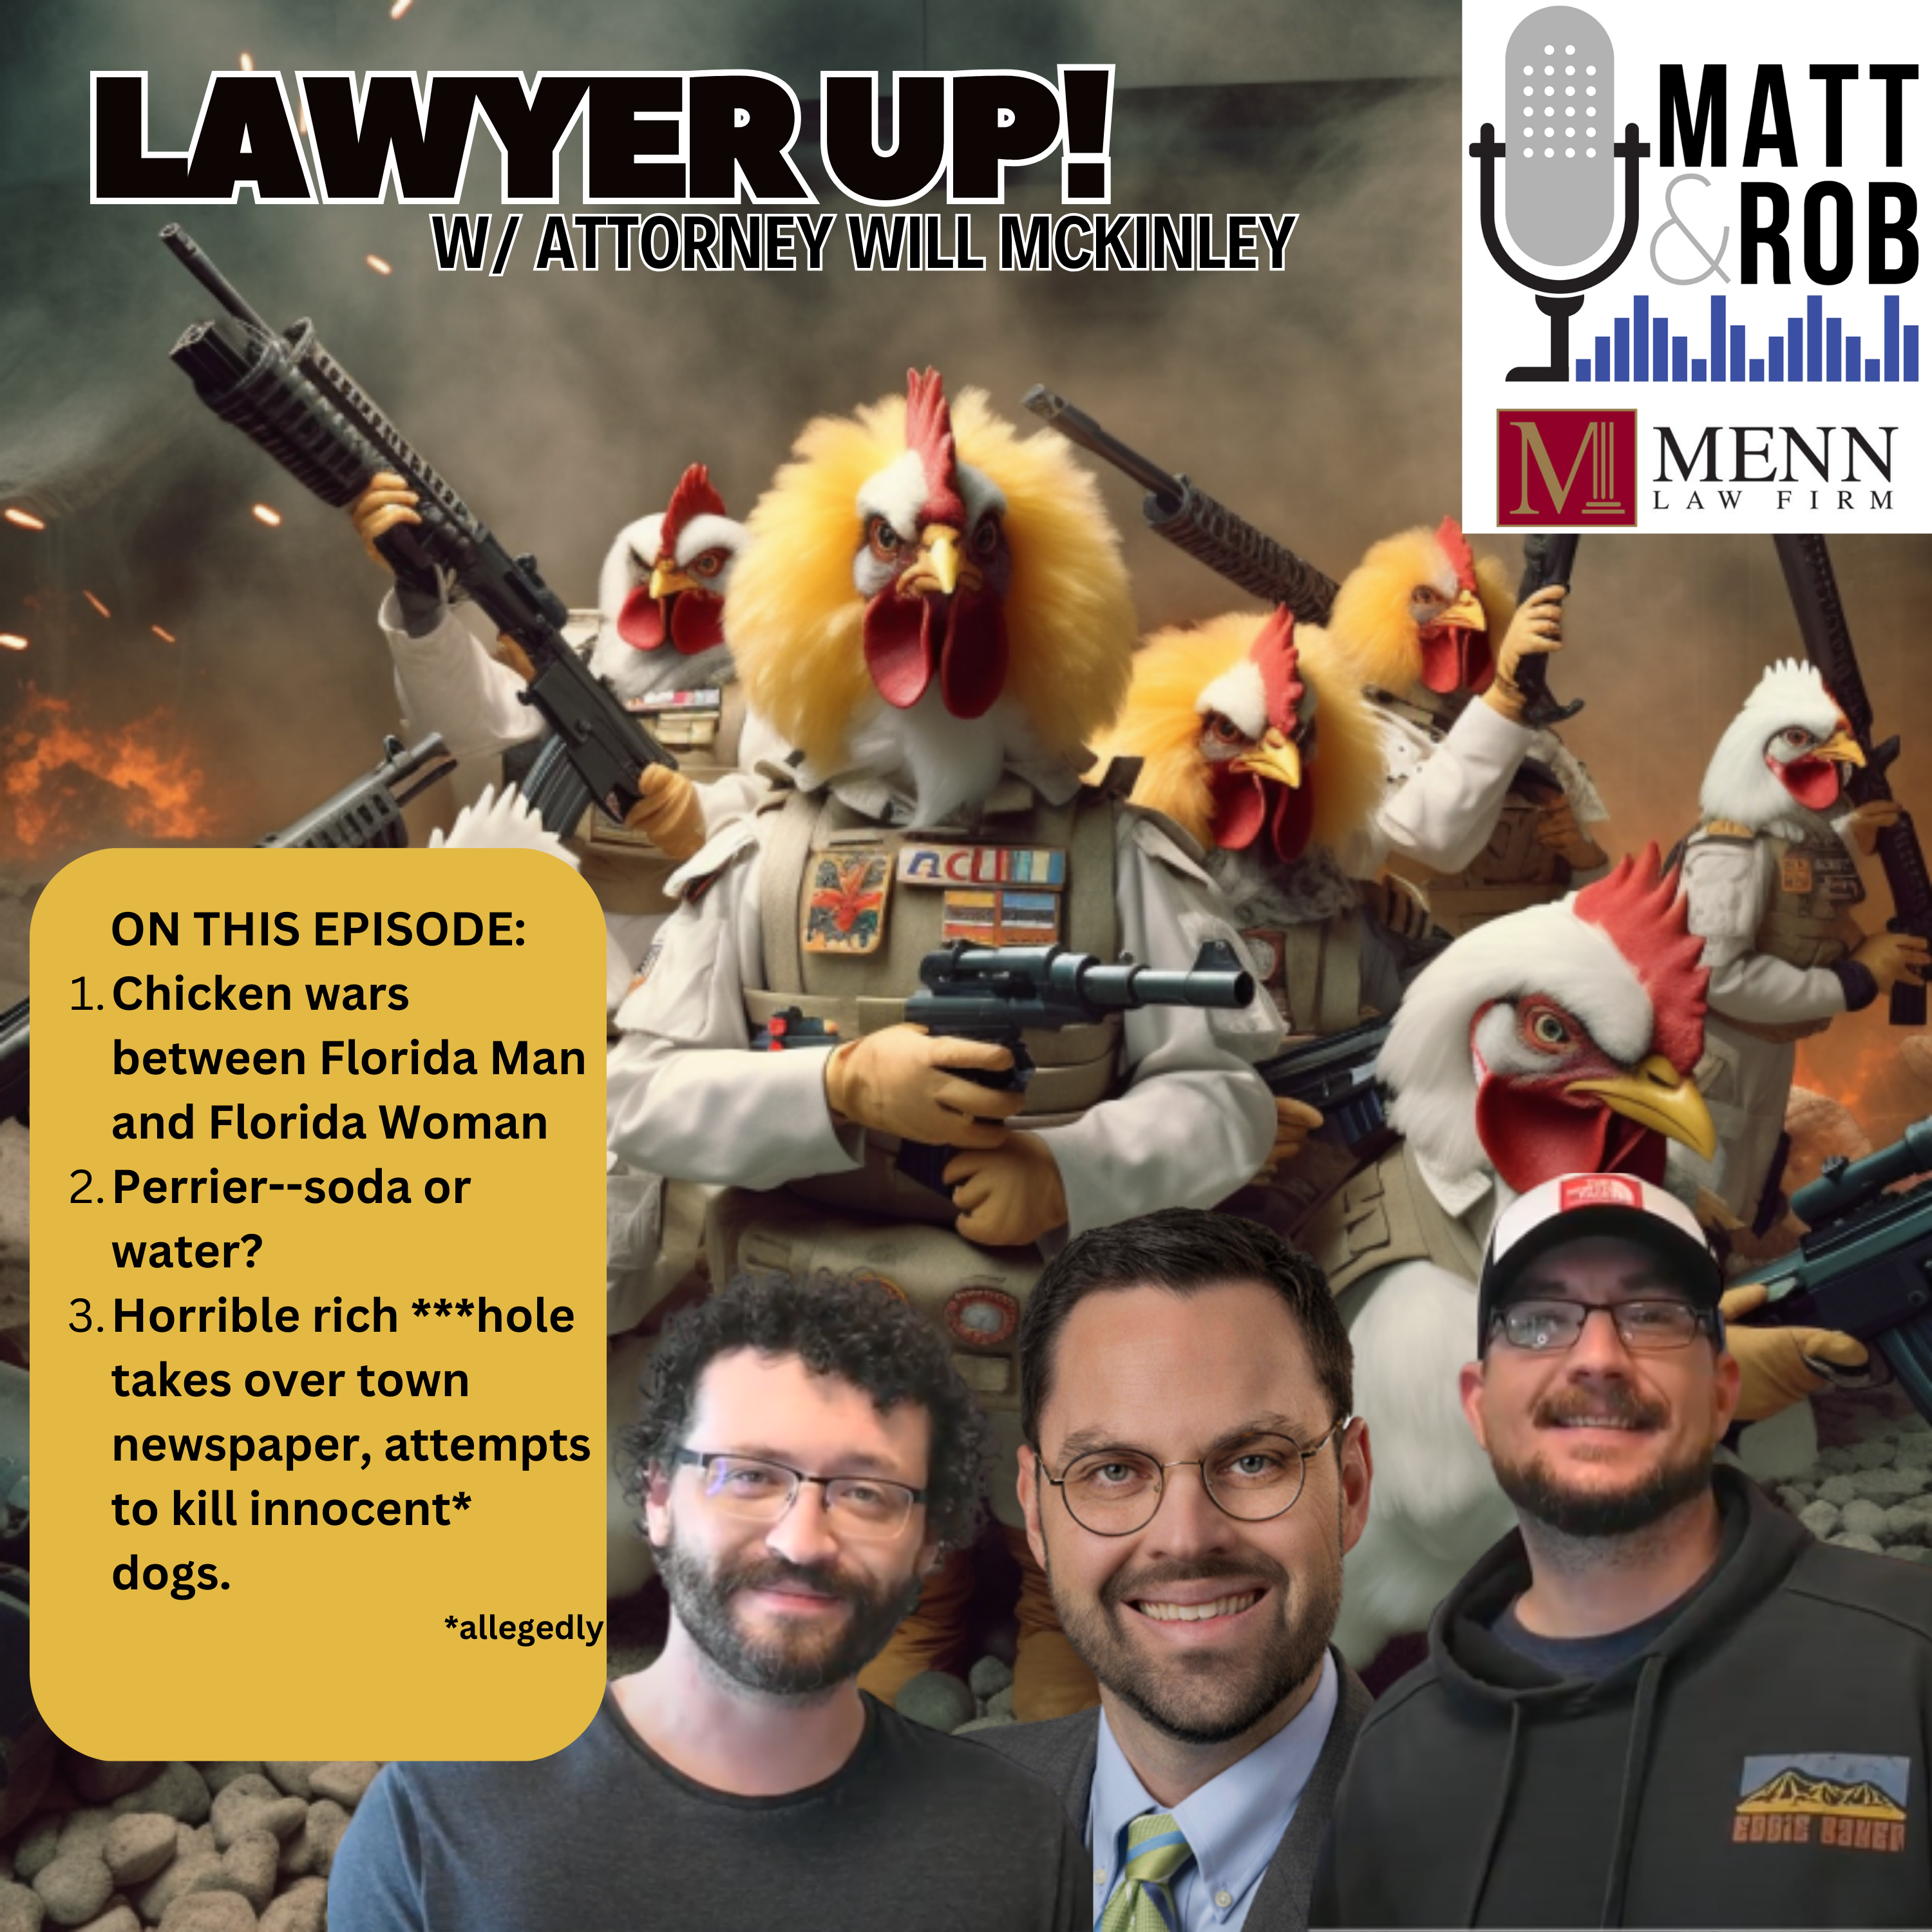 Lawyer Up! feat. Will McKinley of the Menn Law Firm: Begun, the Chicken Wars have